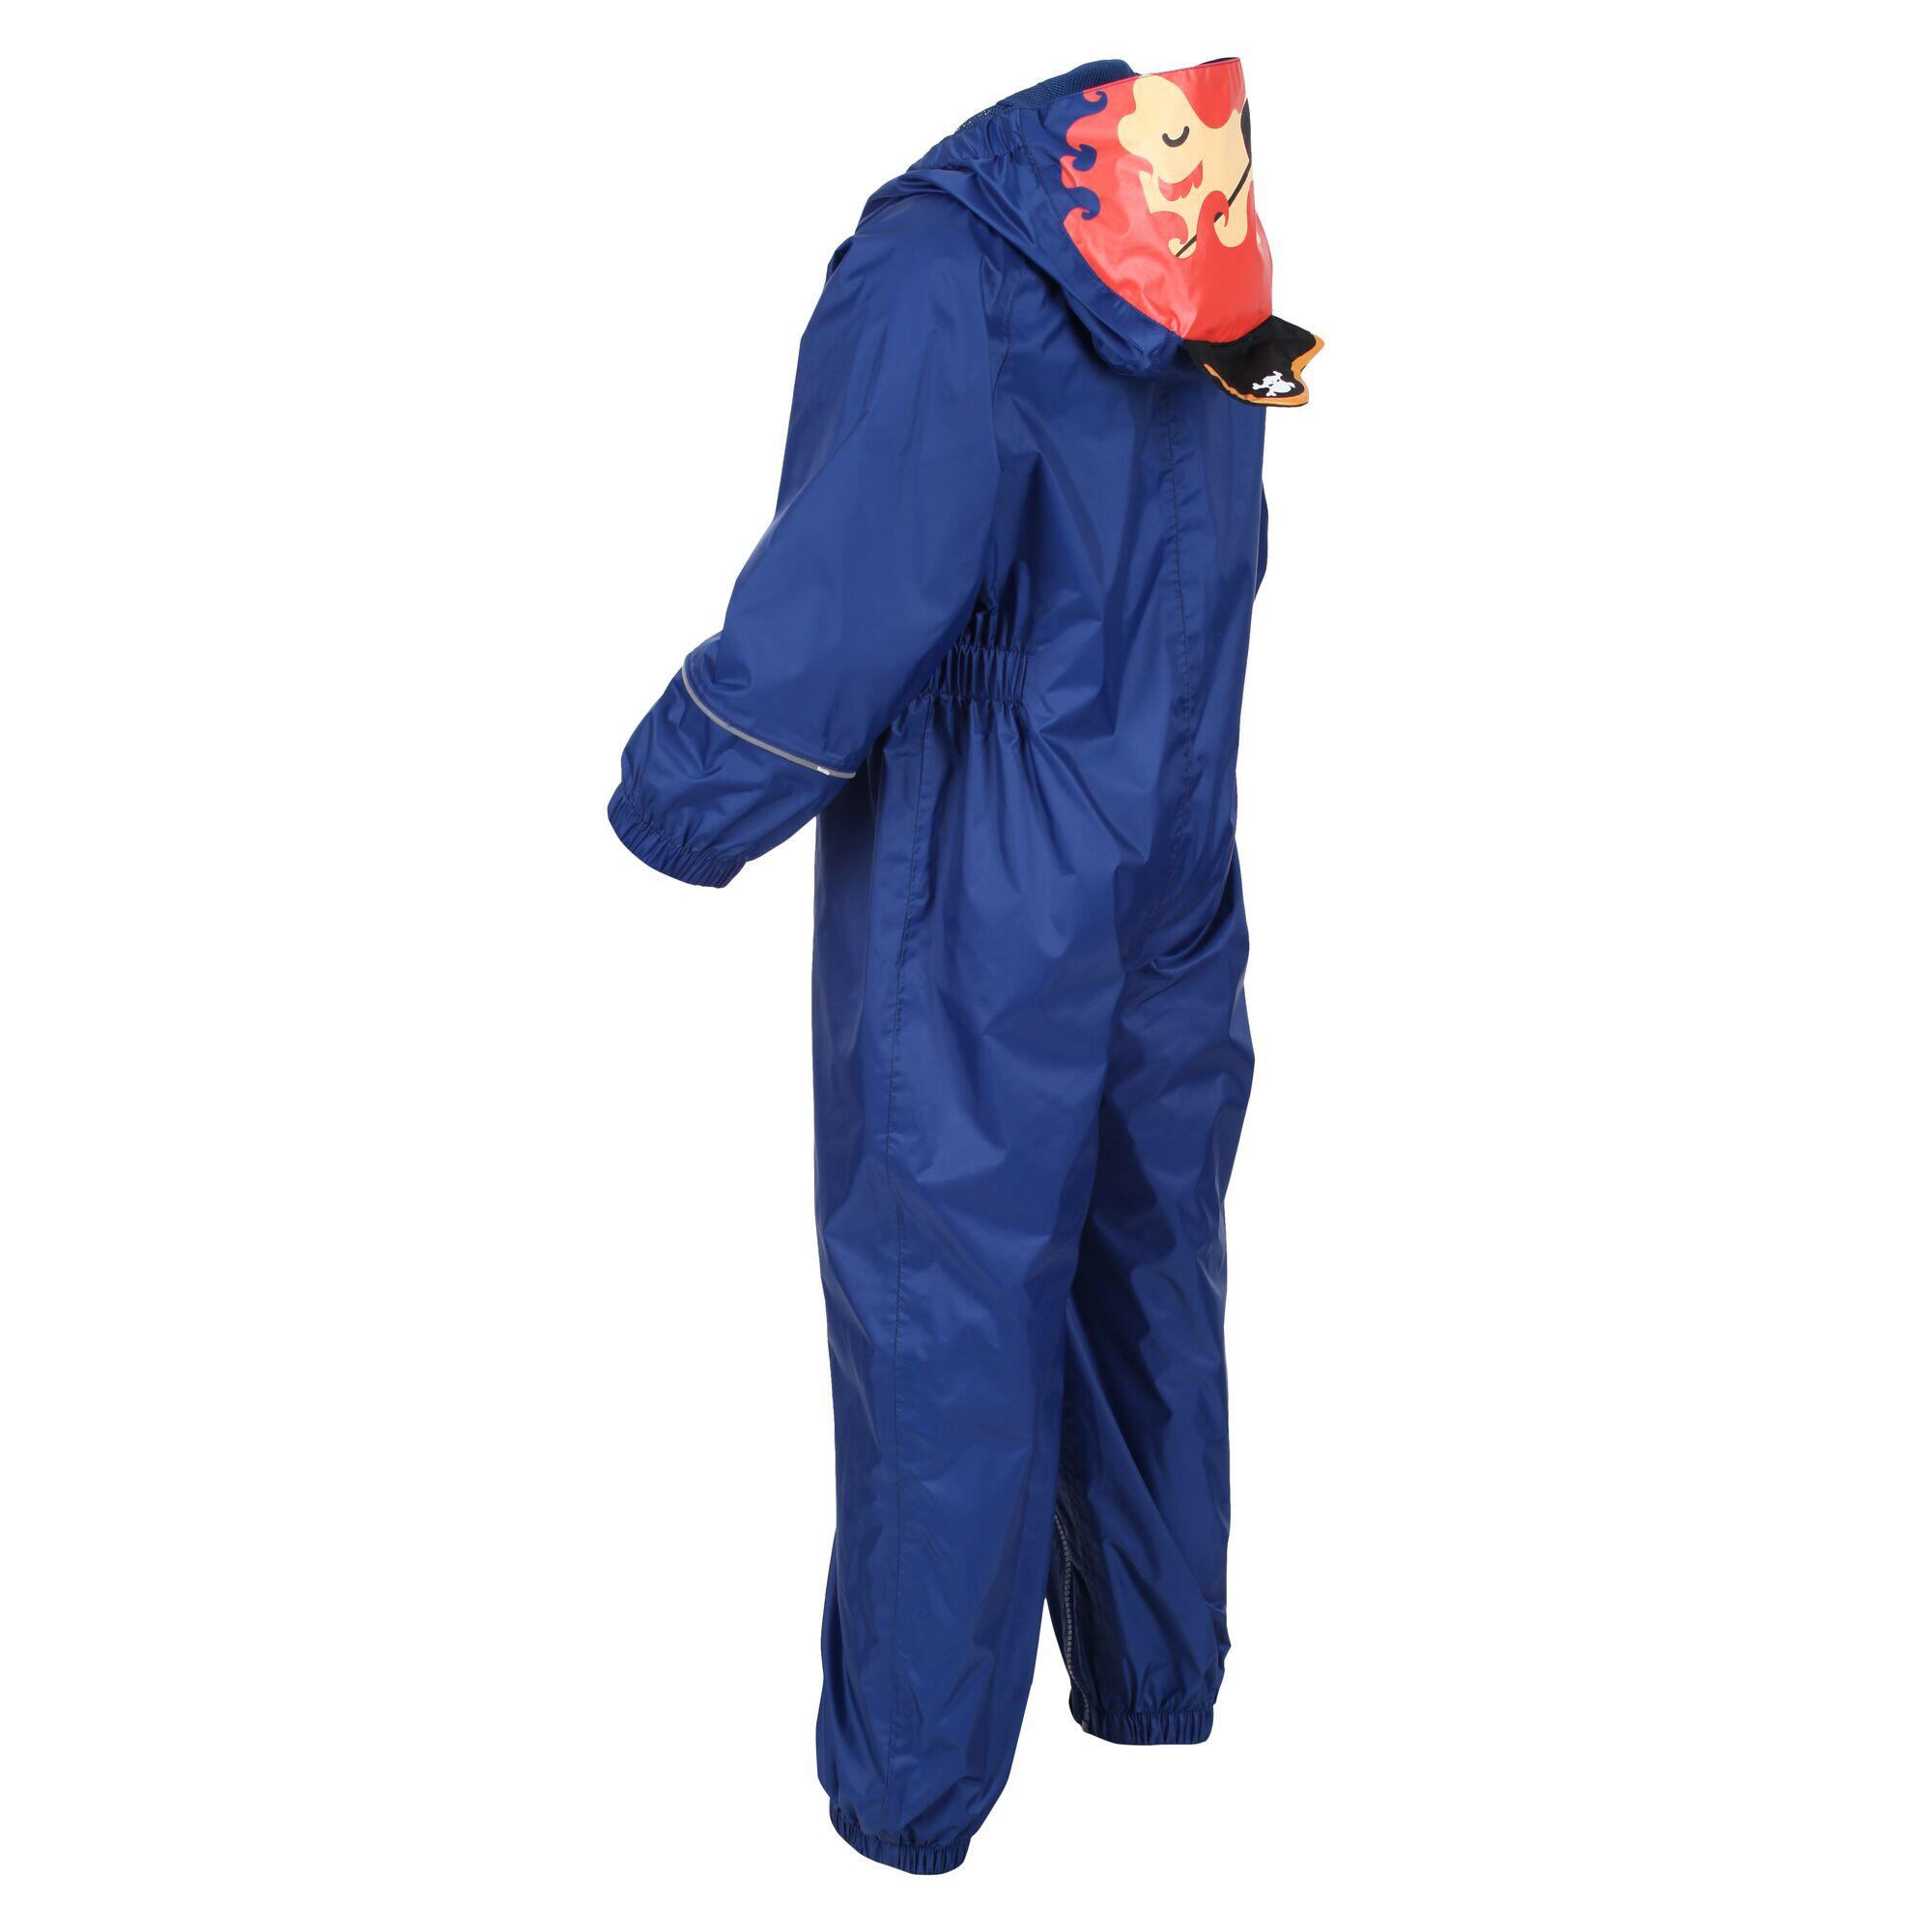 Charco Kids Hiking Hooded Puddle Suit - Blue Pirate 2/4